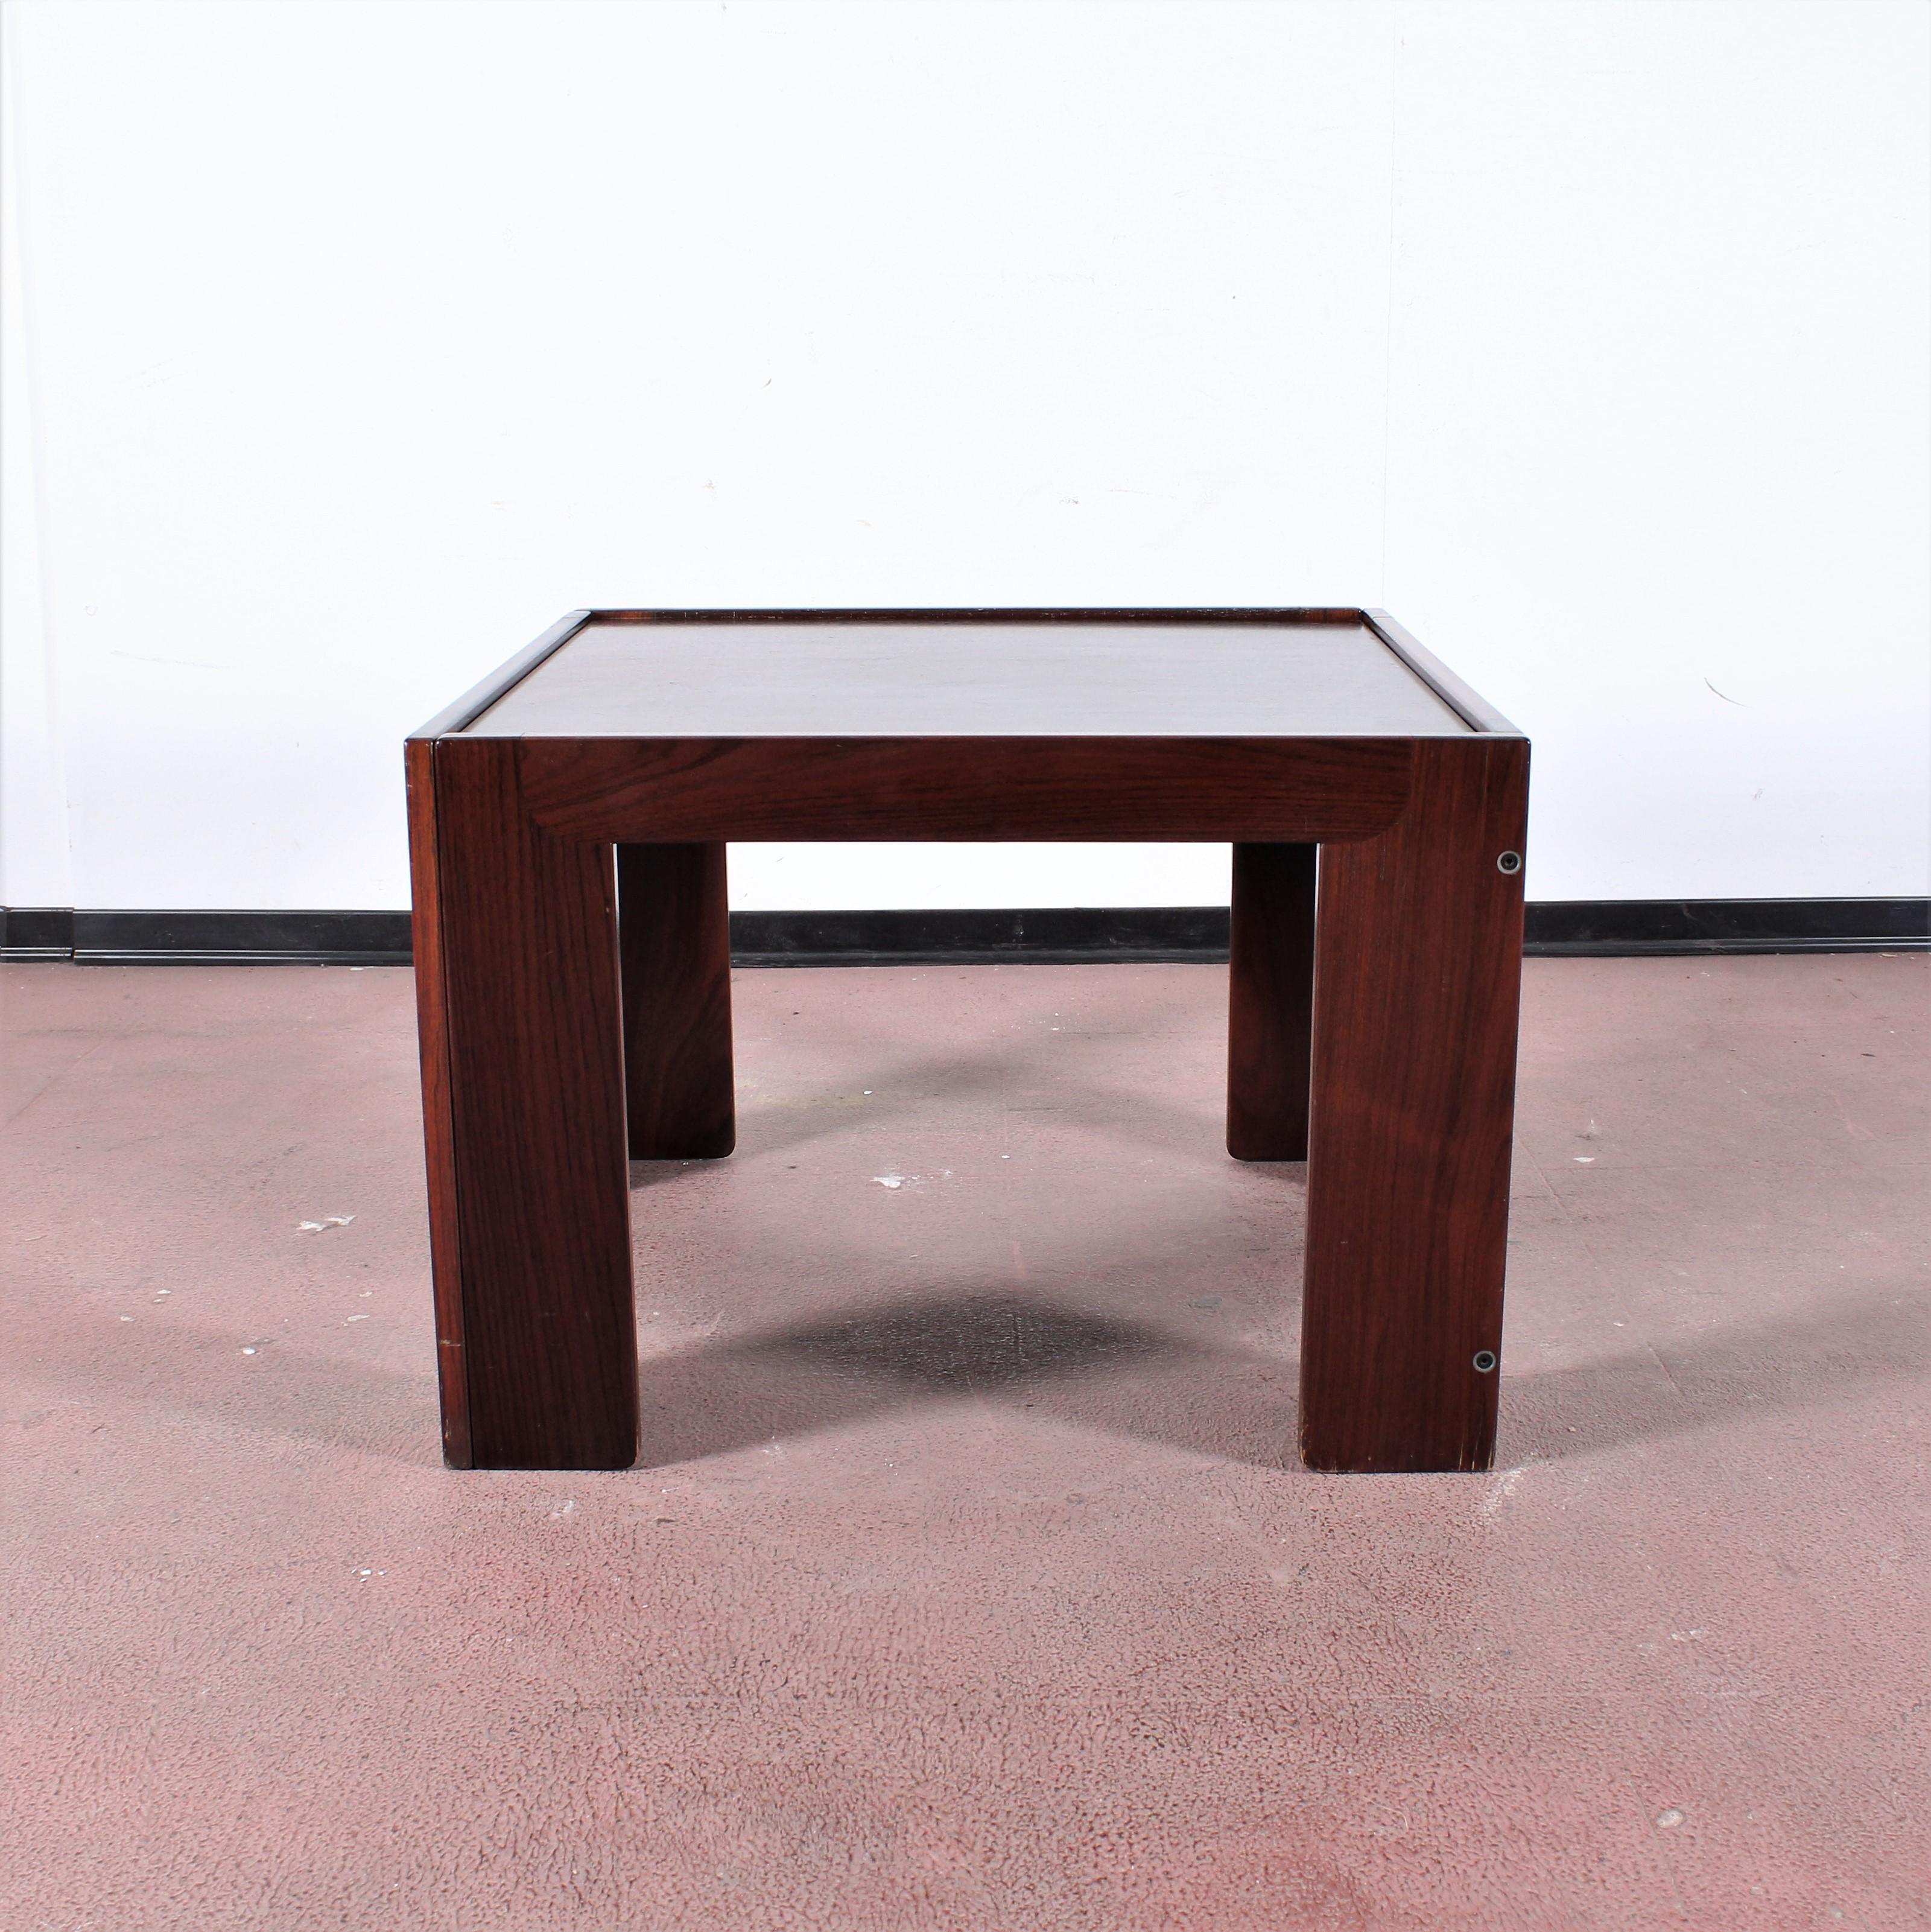 Small wooden table model 